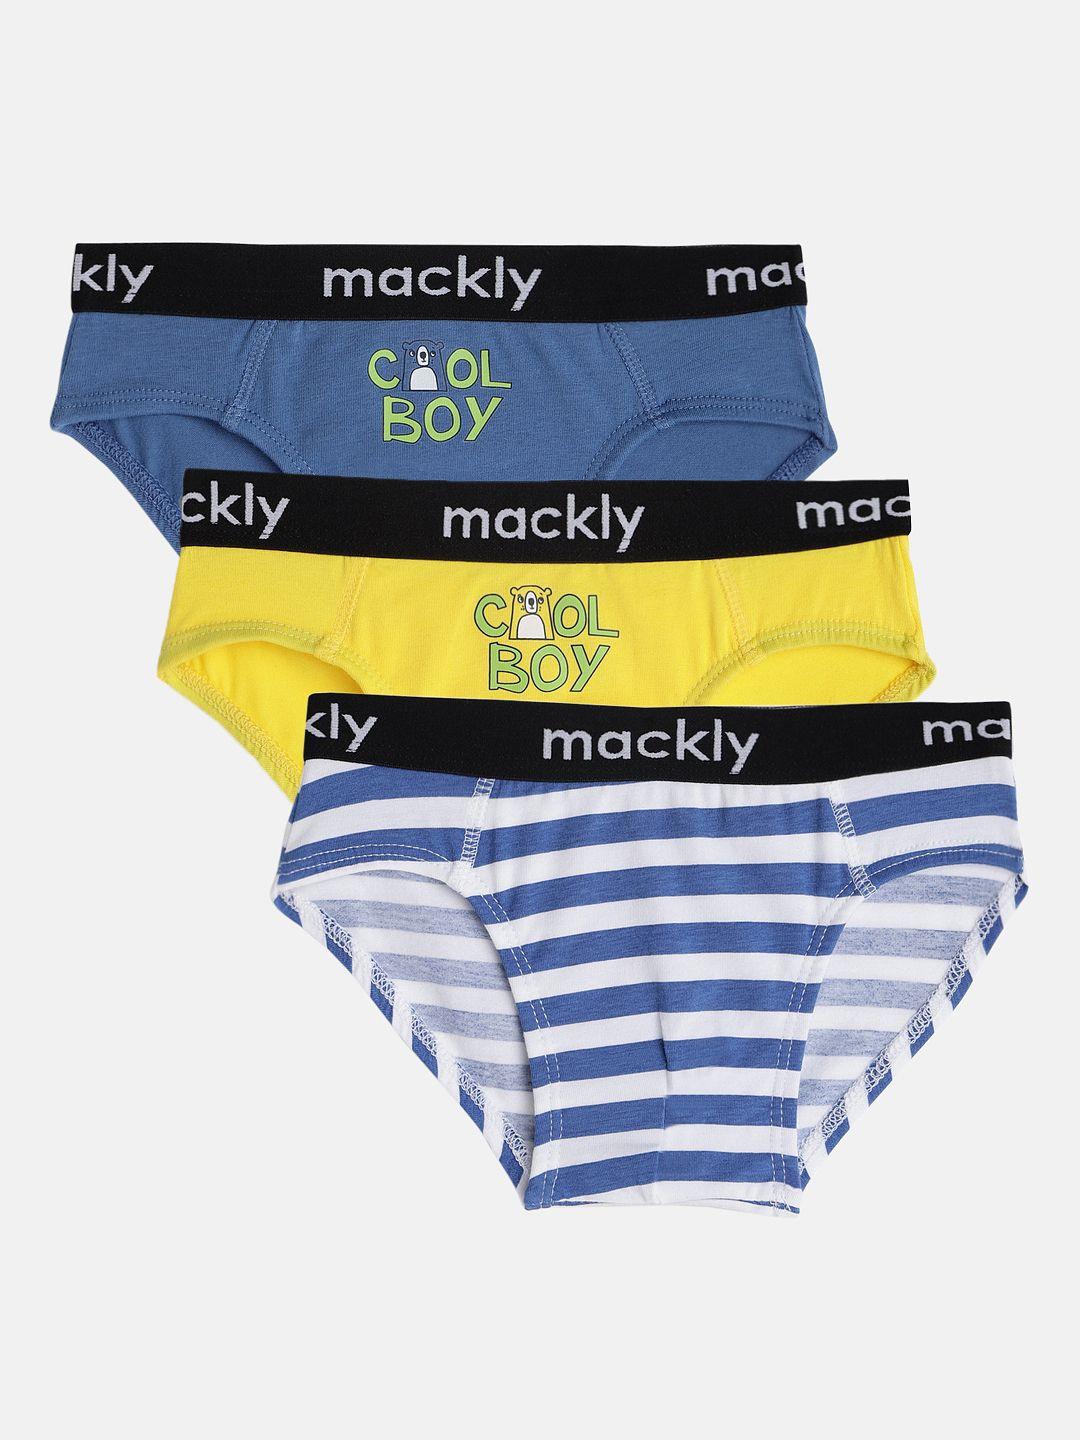 mackly boys pack of 3 briefs mb-14-2-4yrs